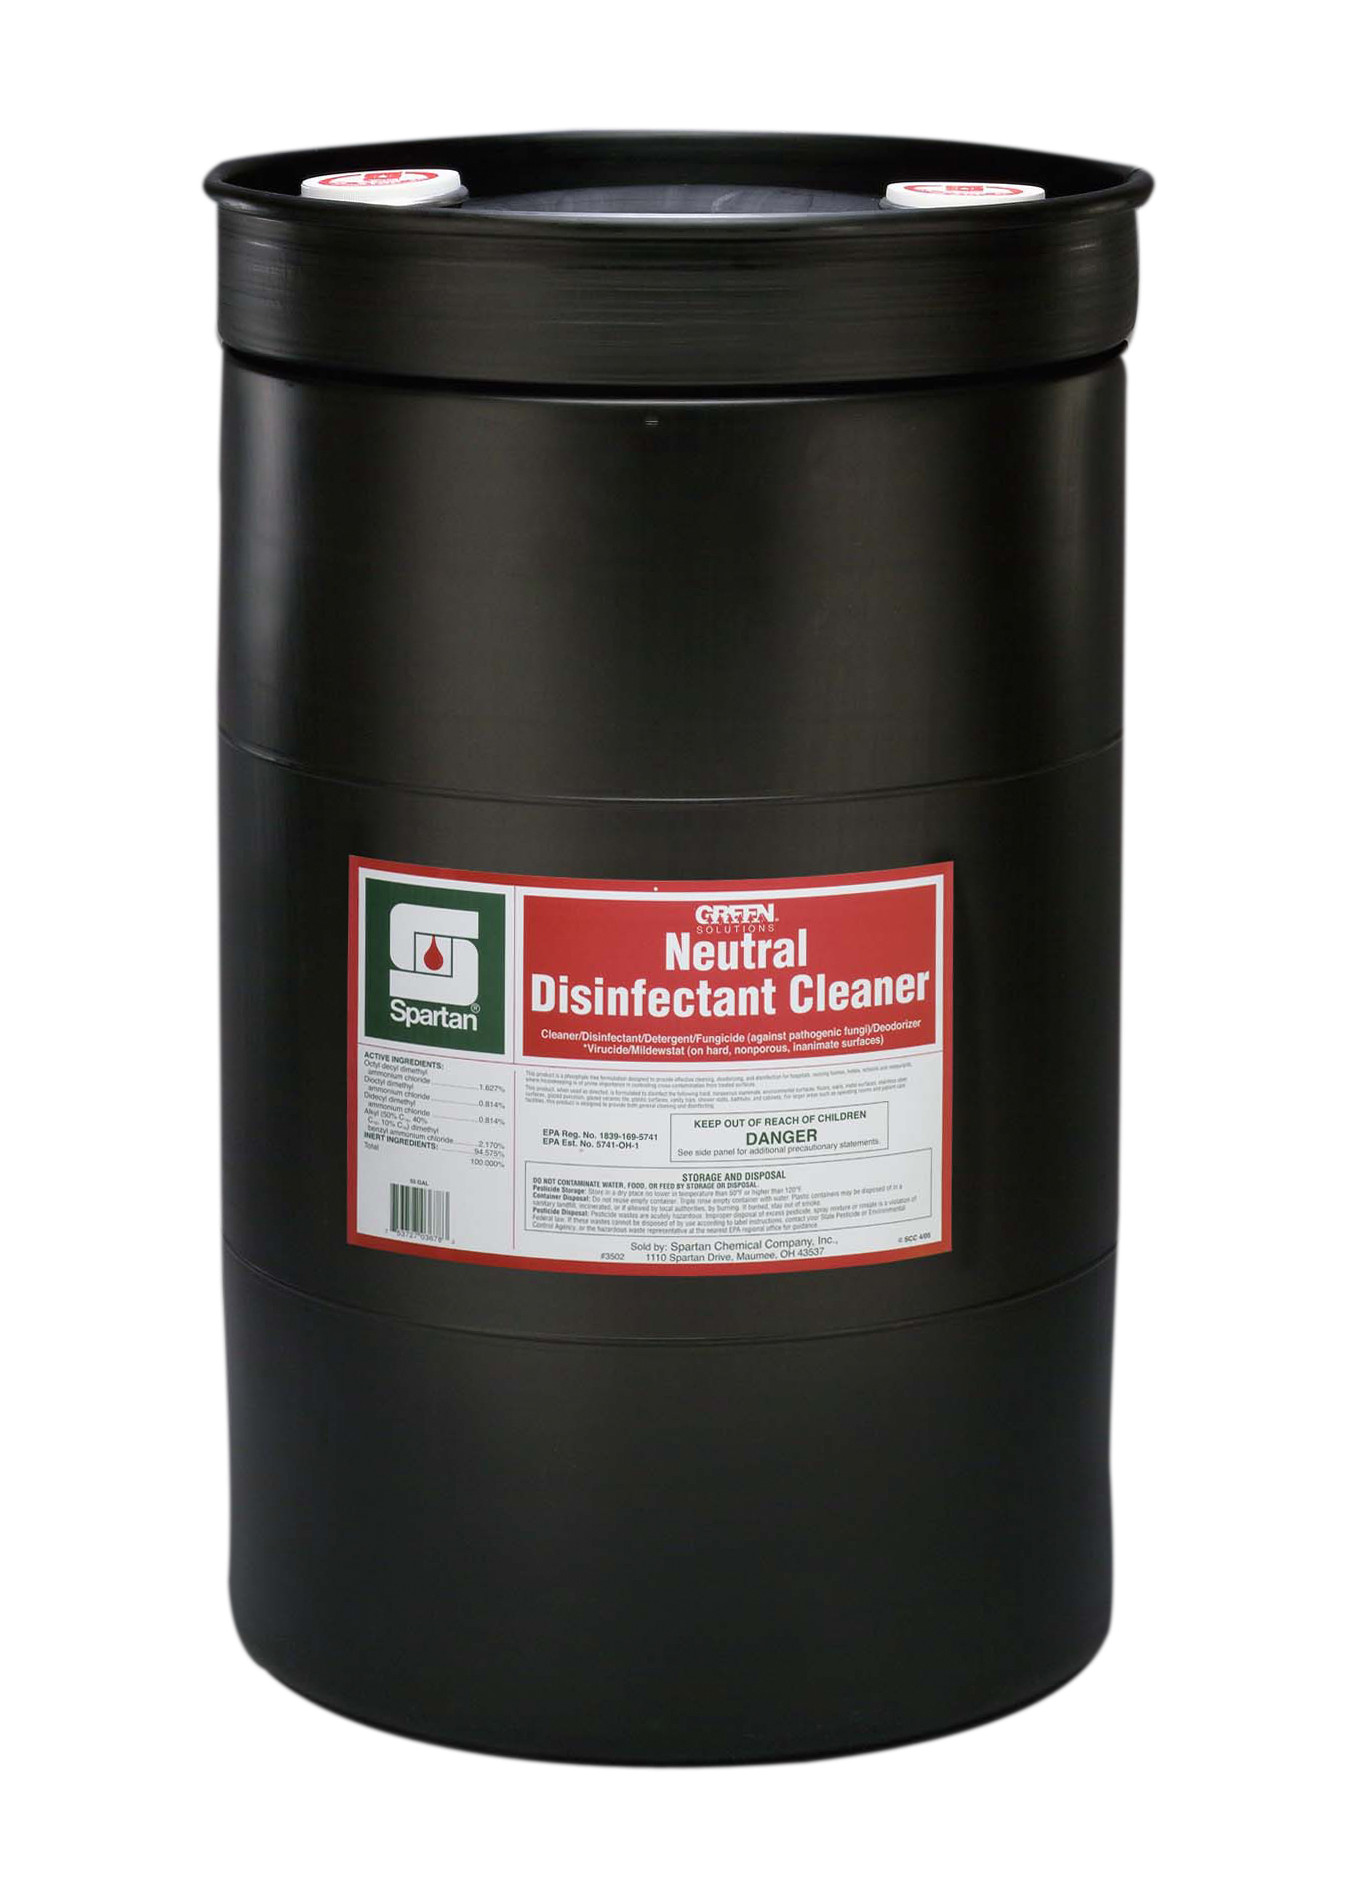 Spartan Chemical Company GS Neutral Disinfectant Cleaner, 30 GAL DRUM